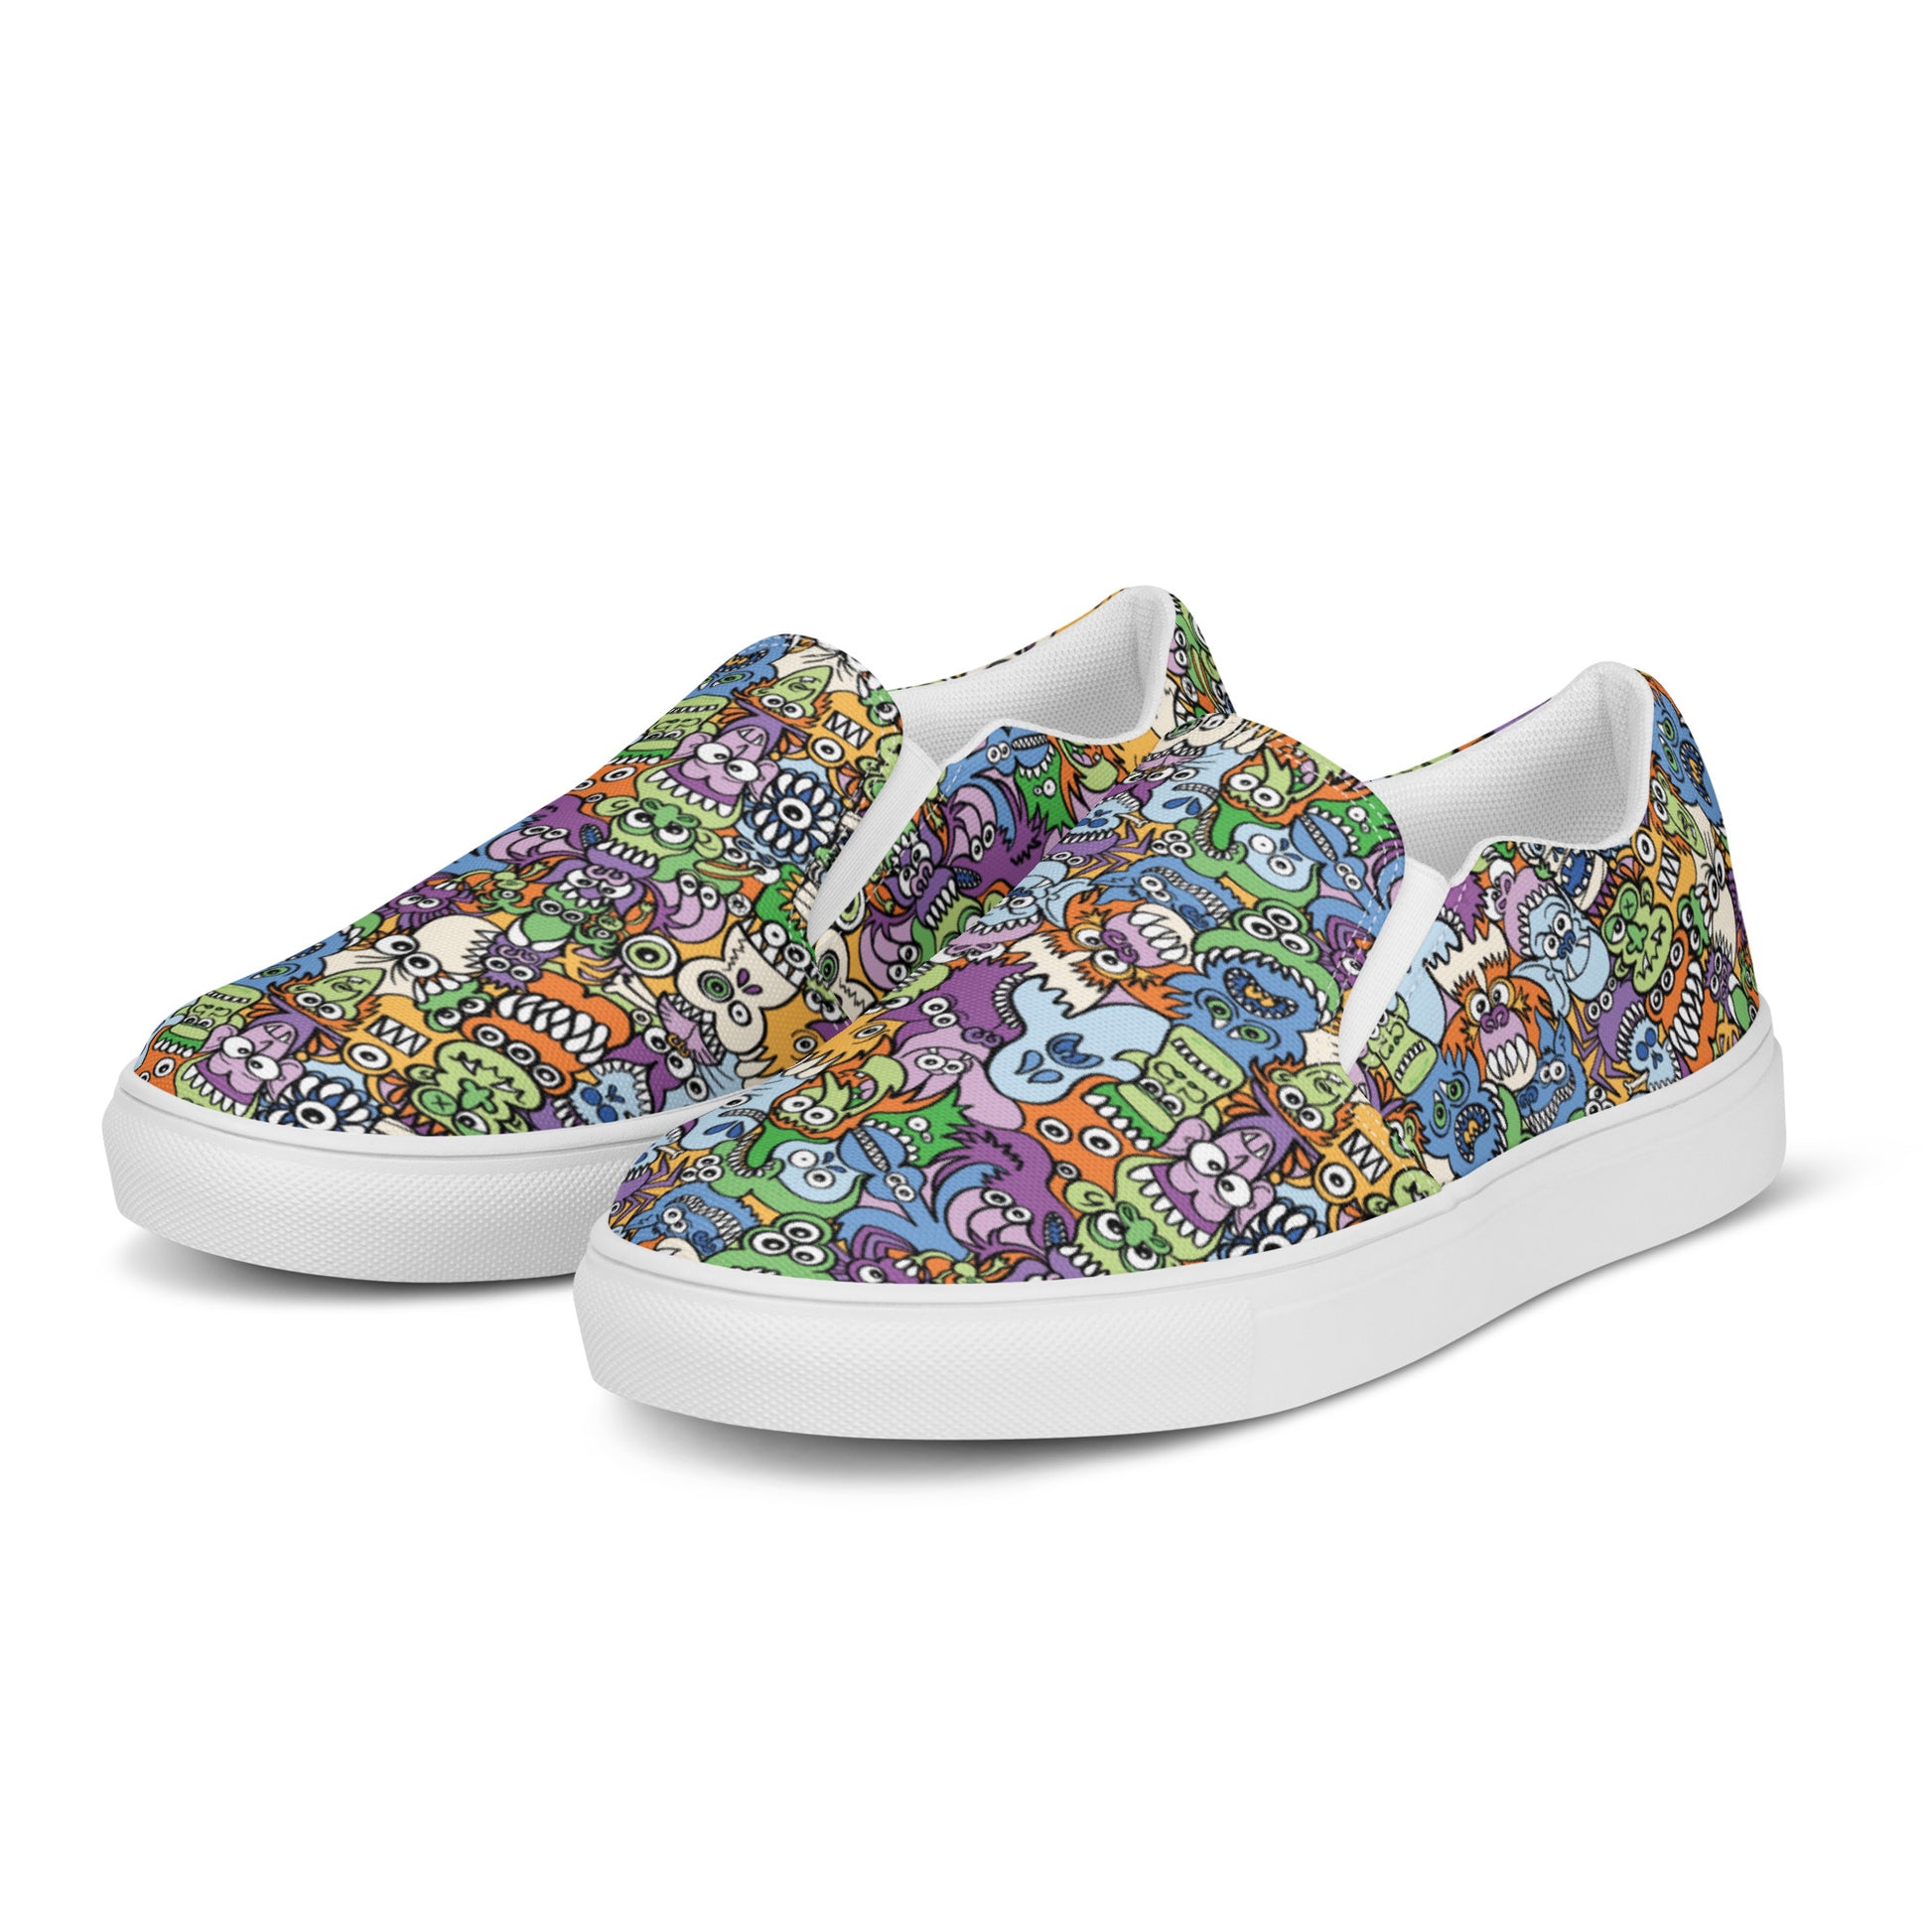 All the spooky Halloween monsters in a pattern design Men’s slip-on canvas shoes. Overview